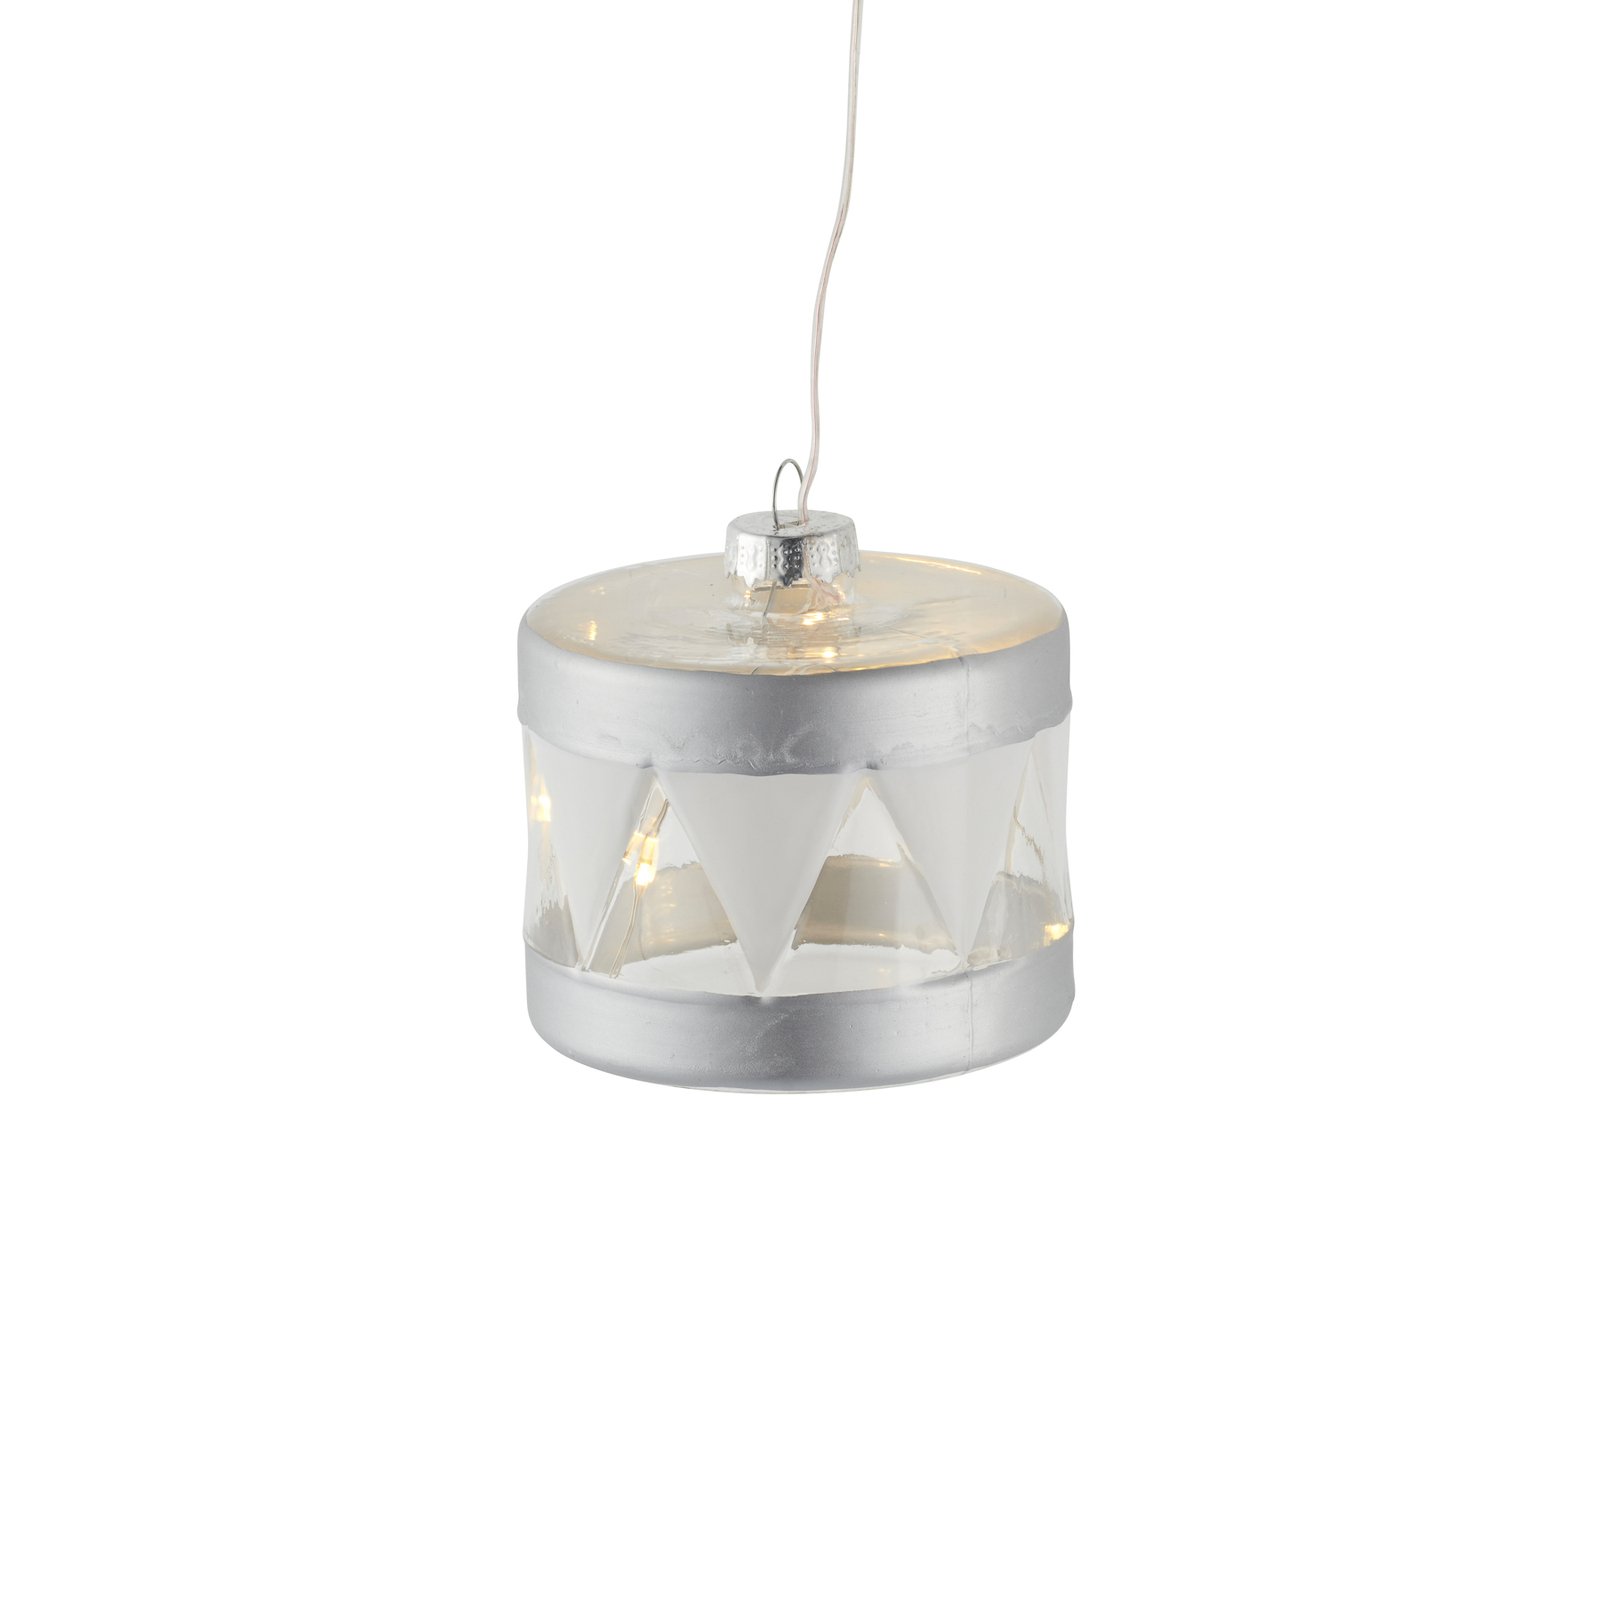 Decorative pendant Elly with LED, Ø 7 cm, silver